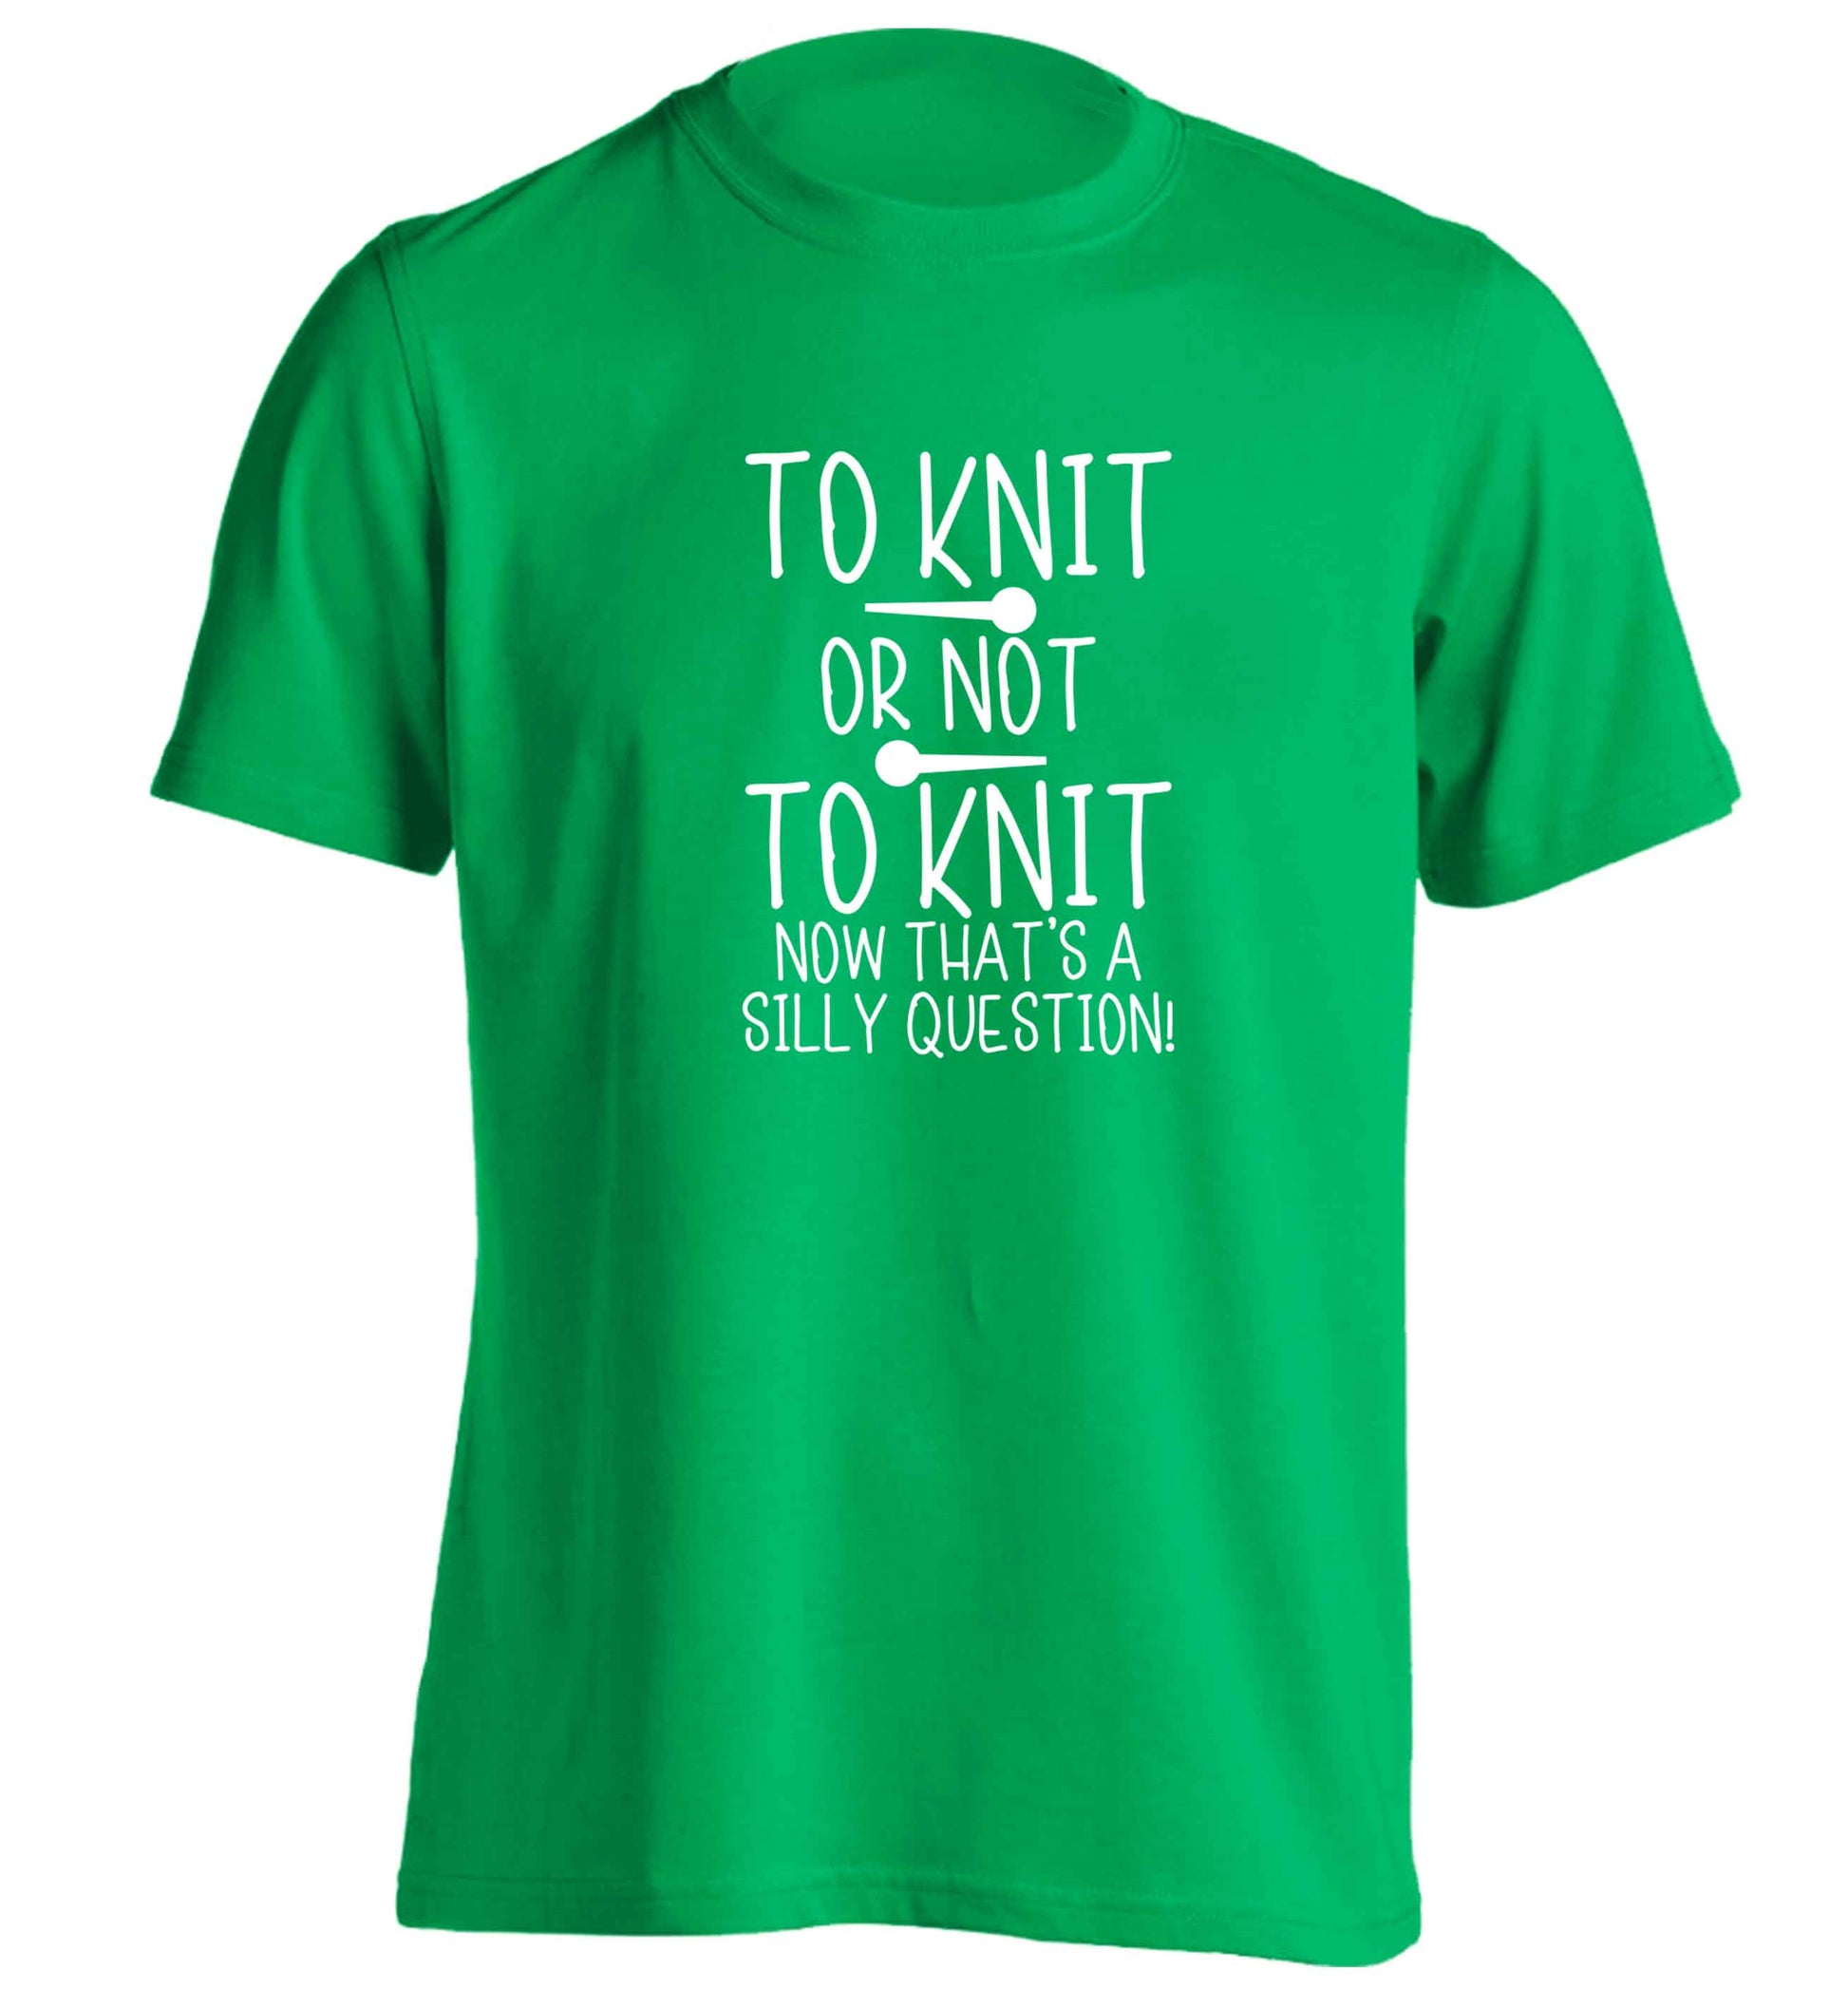 To knit or not to knit now that's a silly question adults unisex green Tshirt 2XL